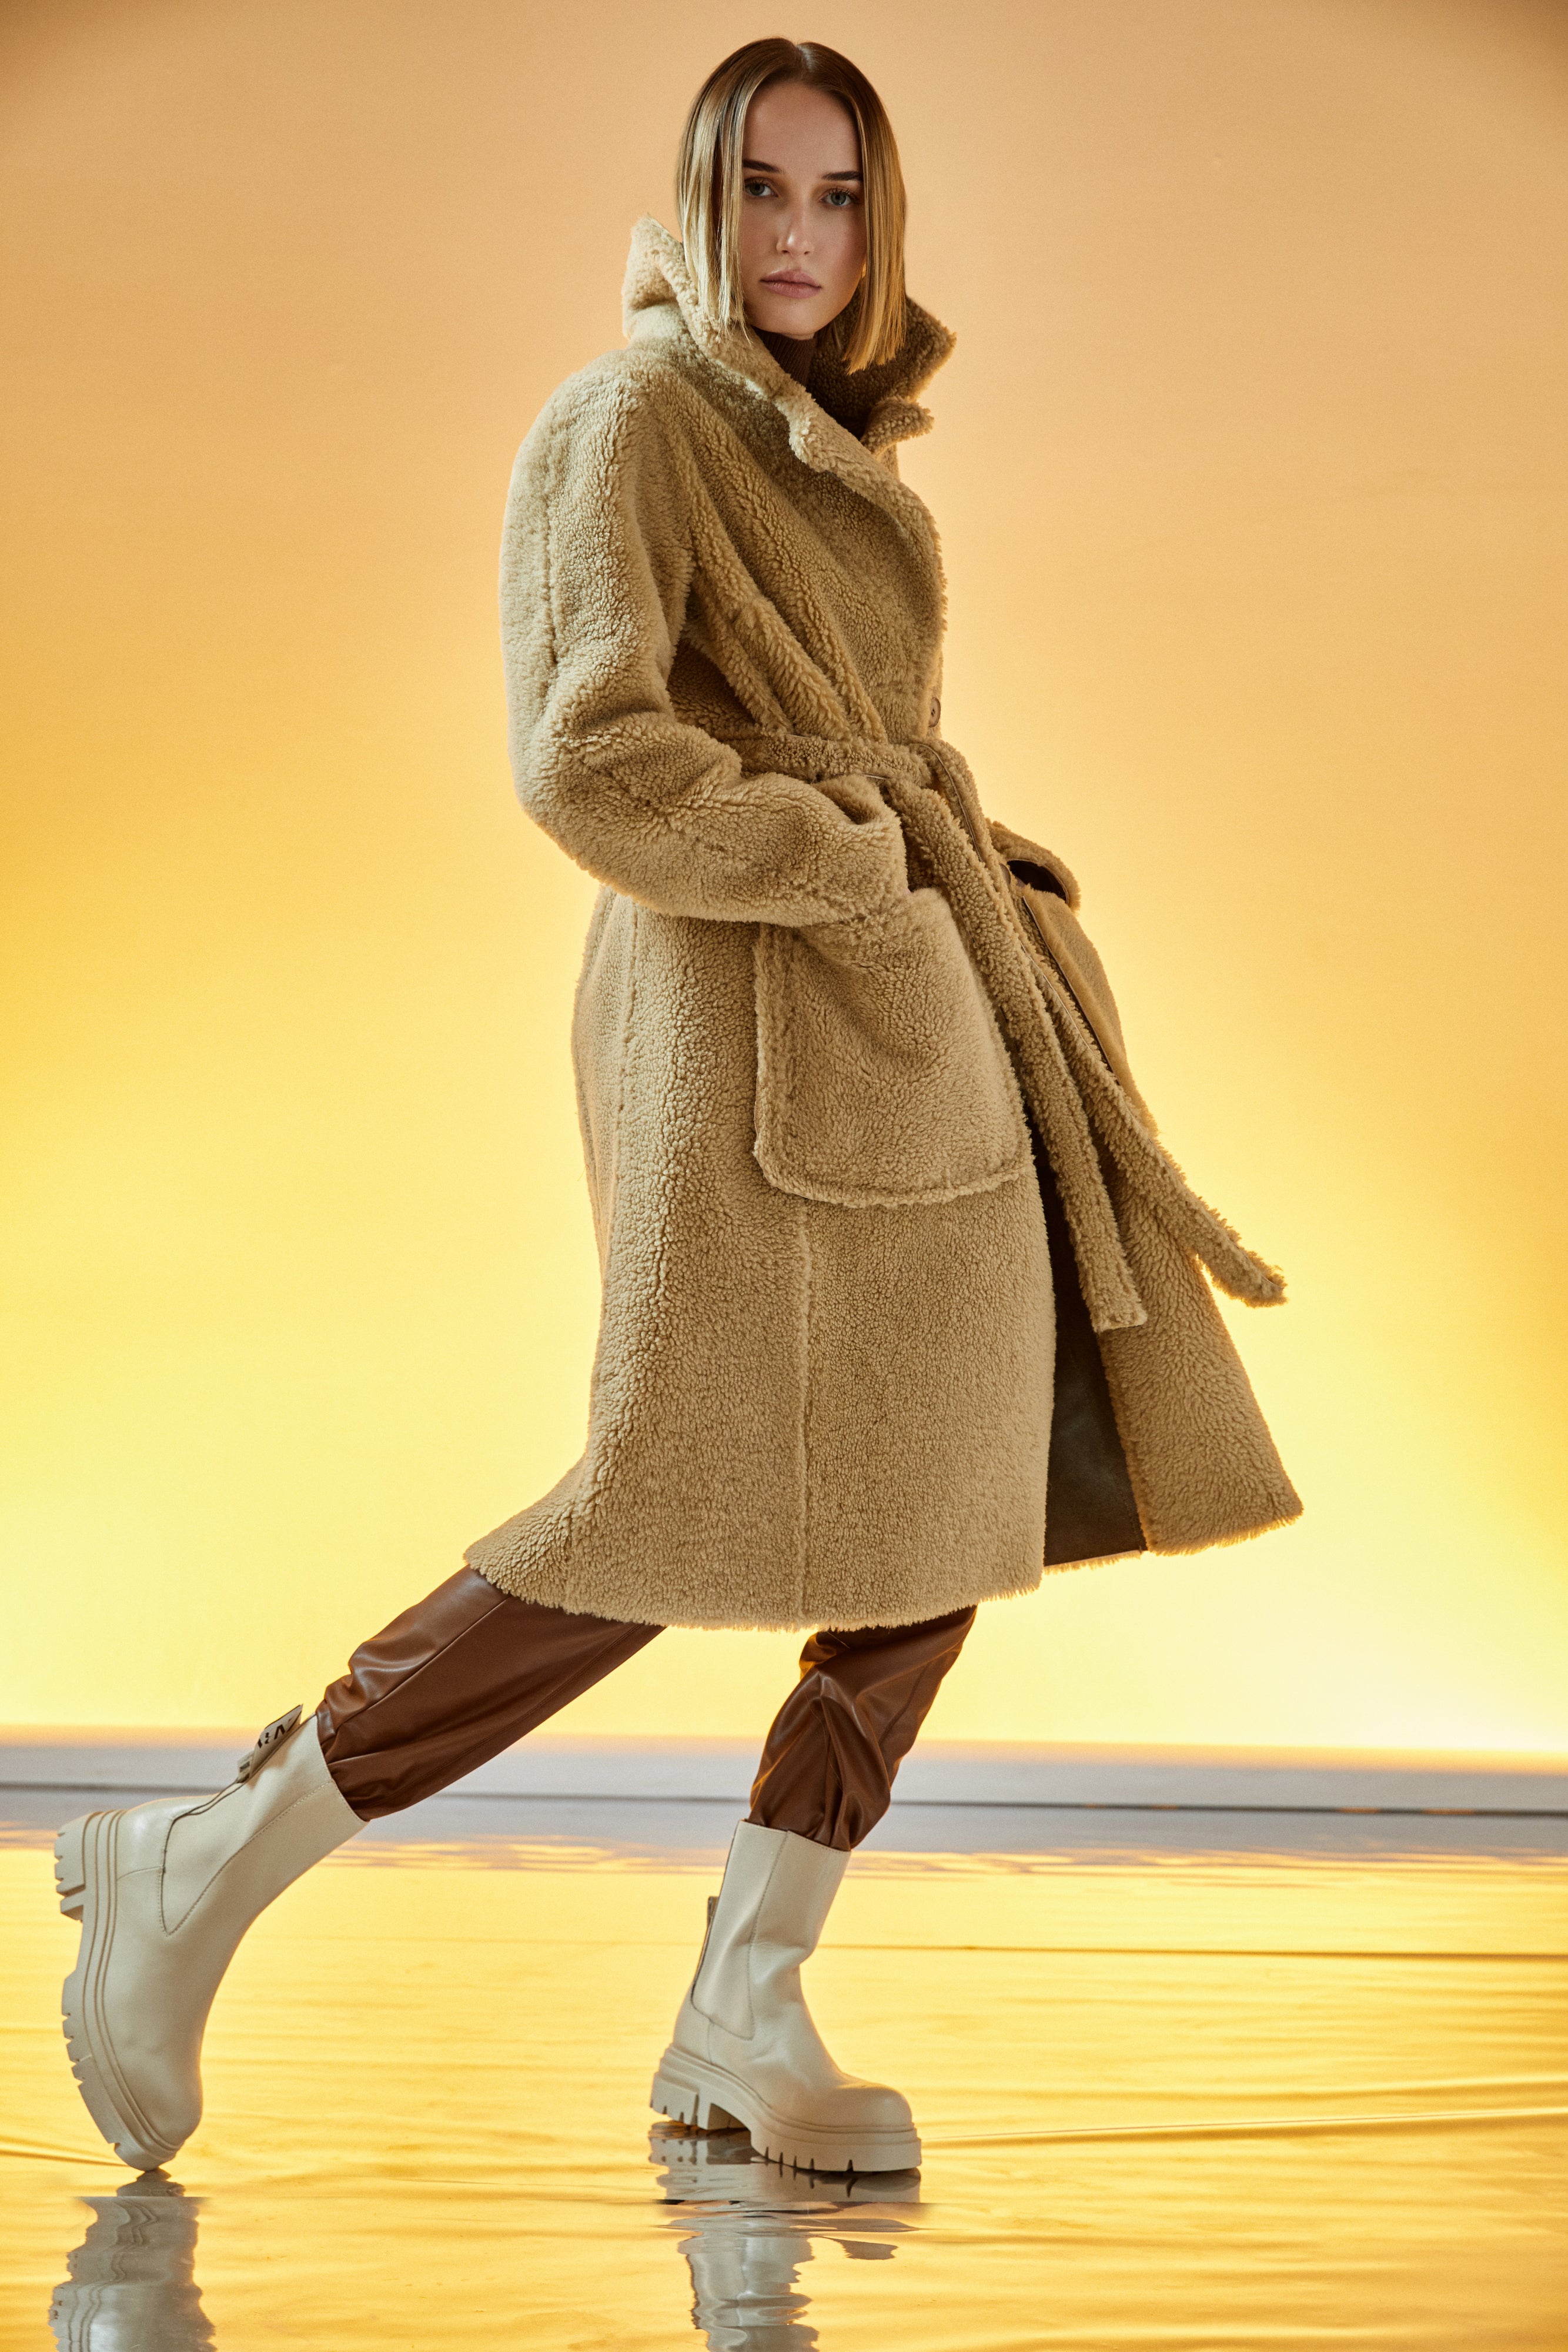 Zira: This elegant, reversible full-length shearling coat offers two beautiful styles in one. 51" long. It reverses from a beautiful nappa finish to a plush fur-out style and has two slip pockets. Made from genuine Spanish merino shearling sheepskin. Double breasted. Slight dropped shoulder fits comfortably across the shoulders. Loose fit through the torso.